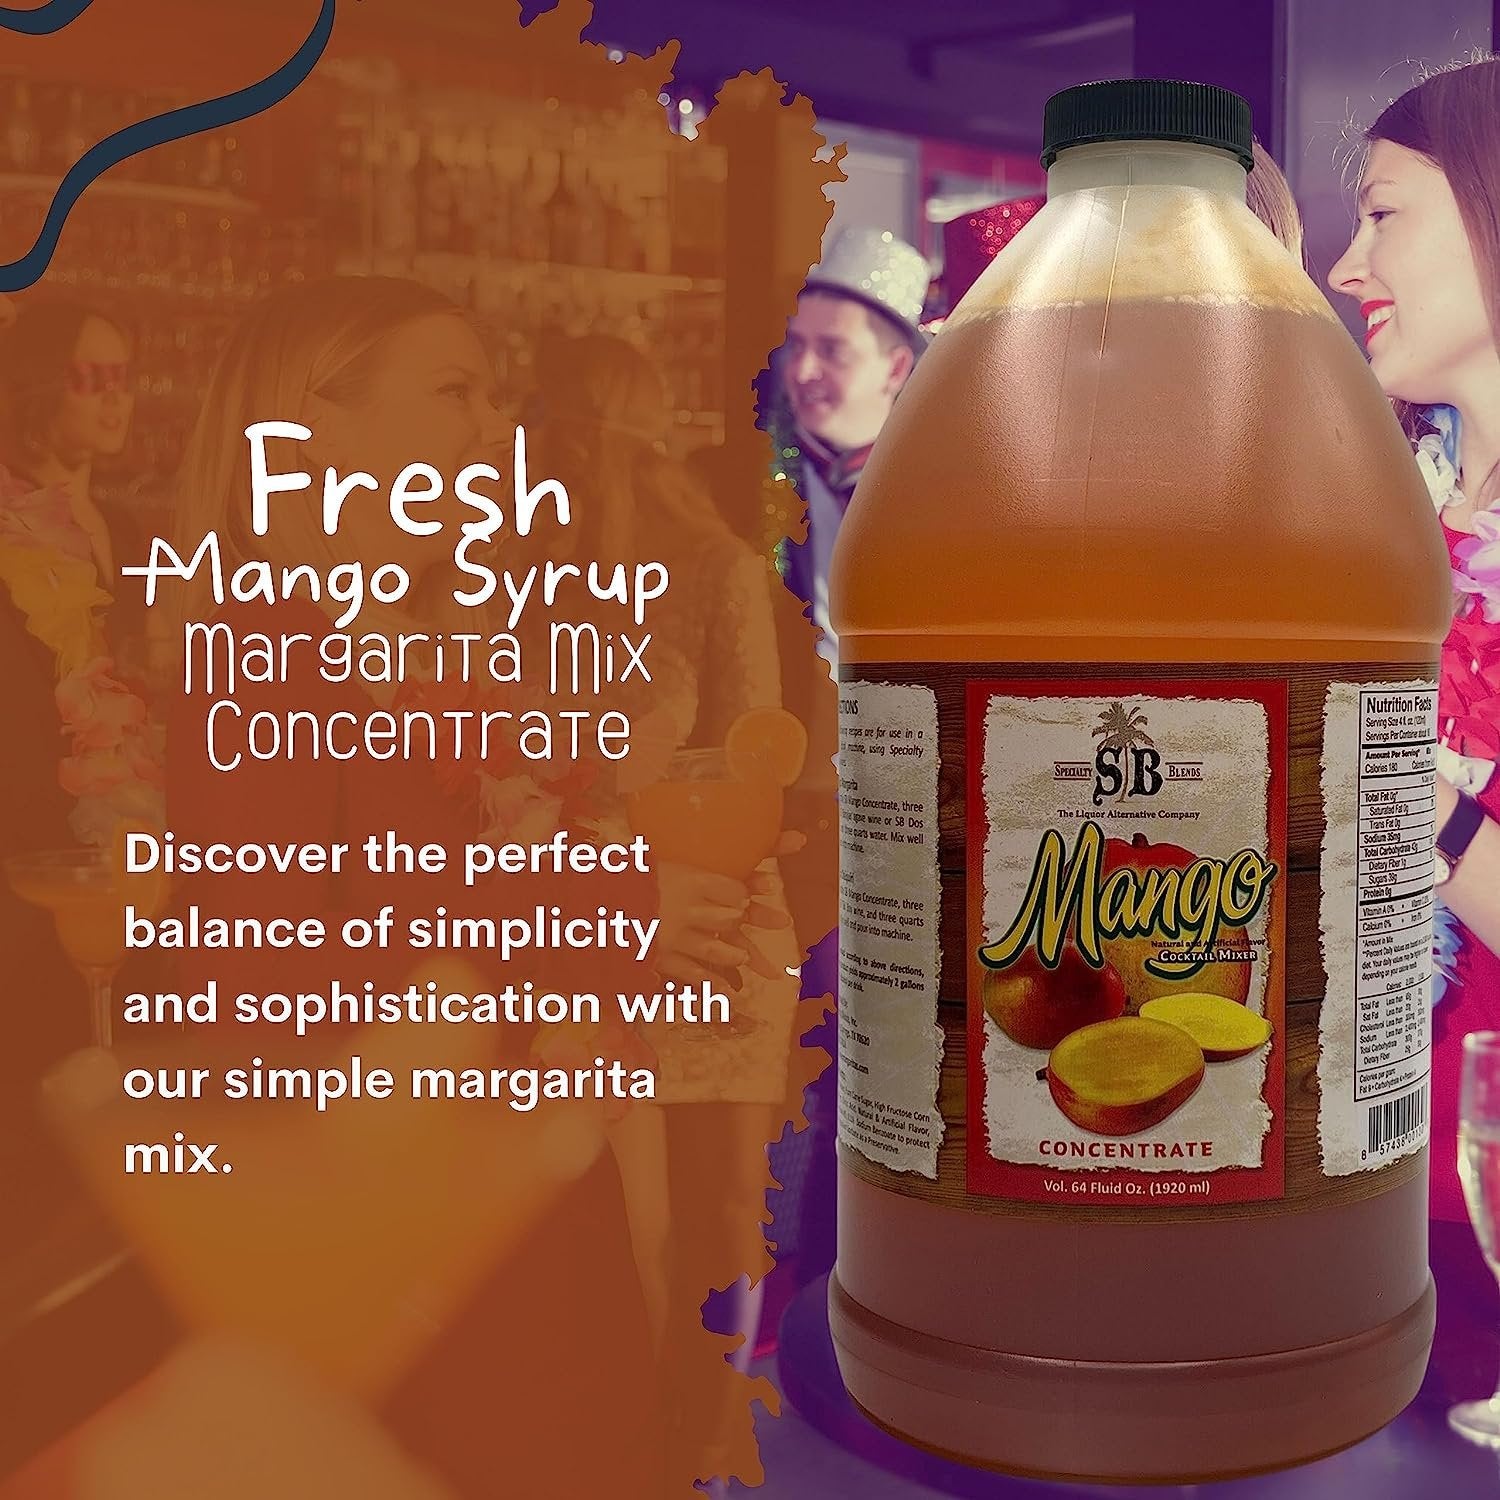 Specialty Blends Mango Syrup For Drinks - Cocktail Syrup Margarita Mix Concentrate, Made with Organic Mango 1/2 Gallon Drink Mix (Pack of 1) - with Bonus Worldwide Nutrition Multi Purpose Key Chain